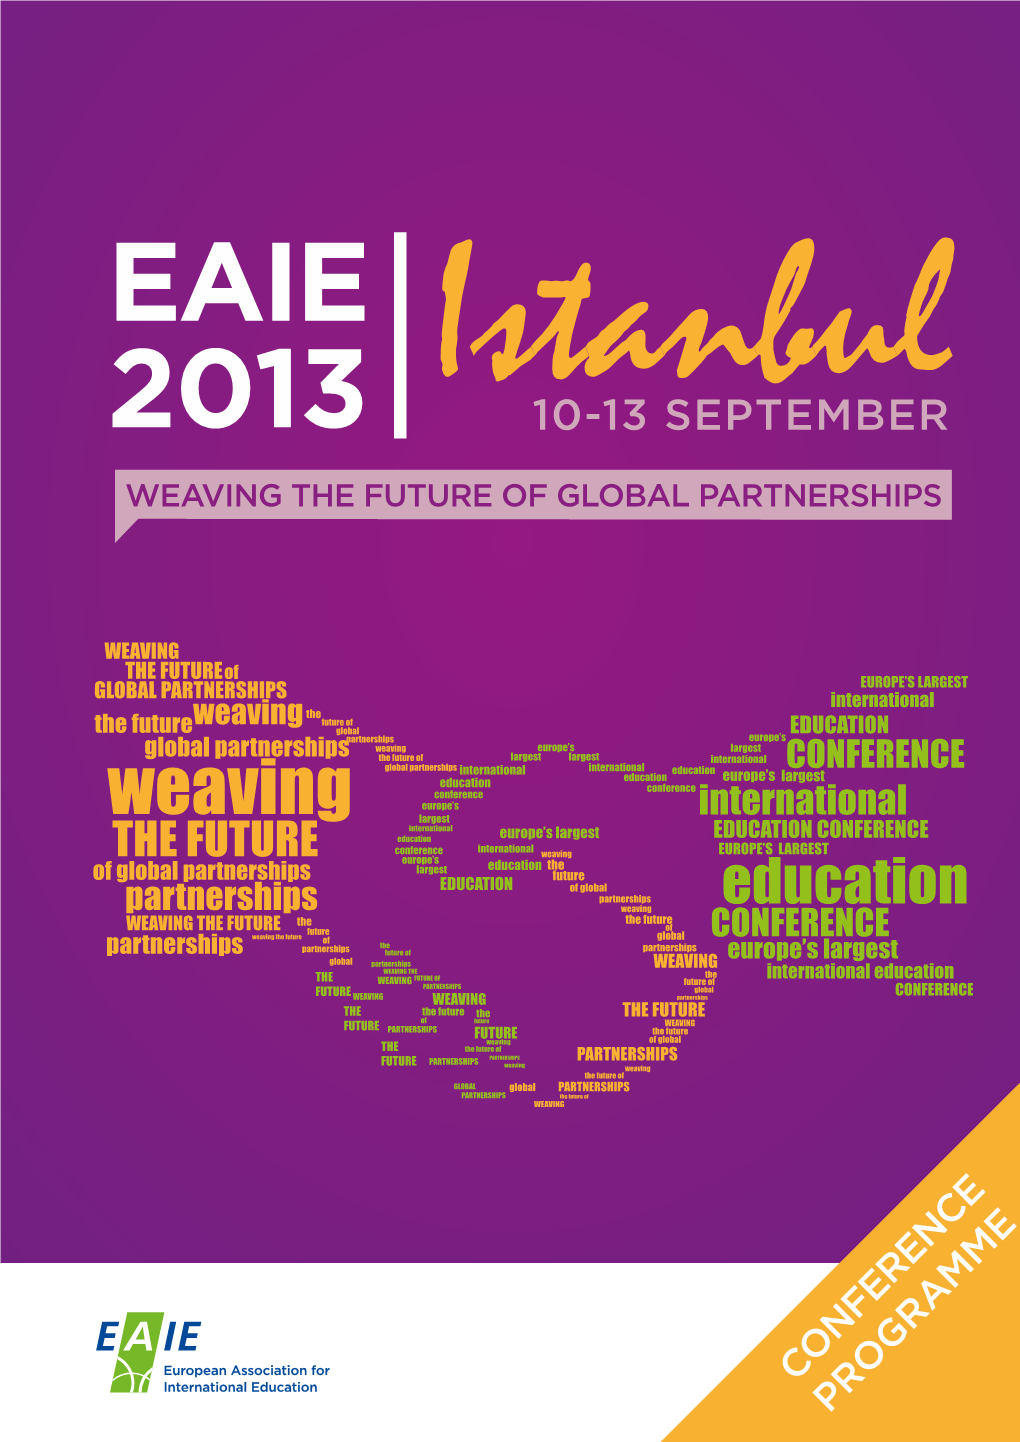 Conference Programme EAIE ISTANBUL 2013 02 Welcome